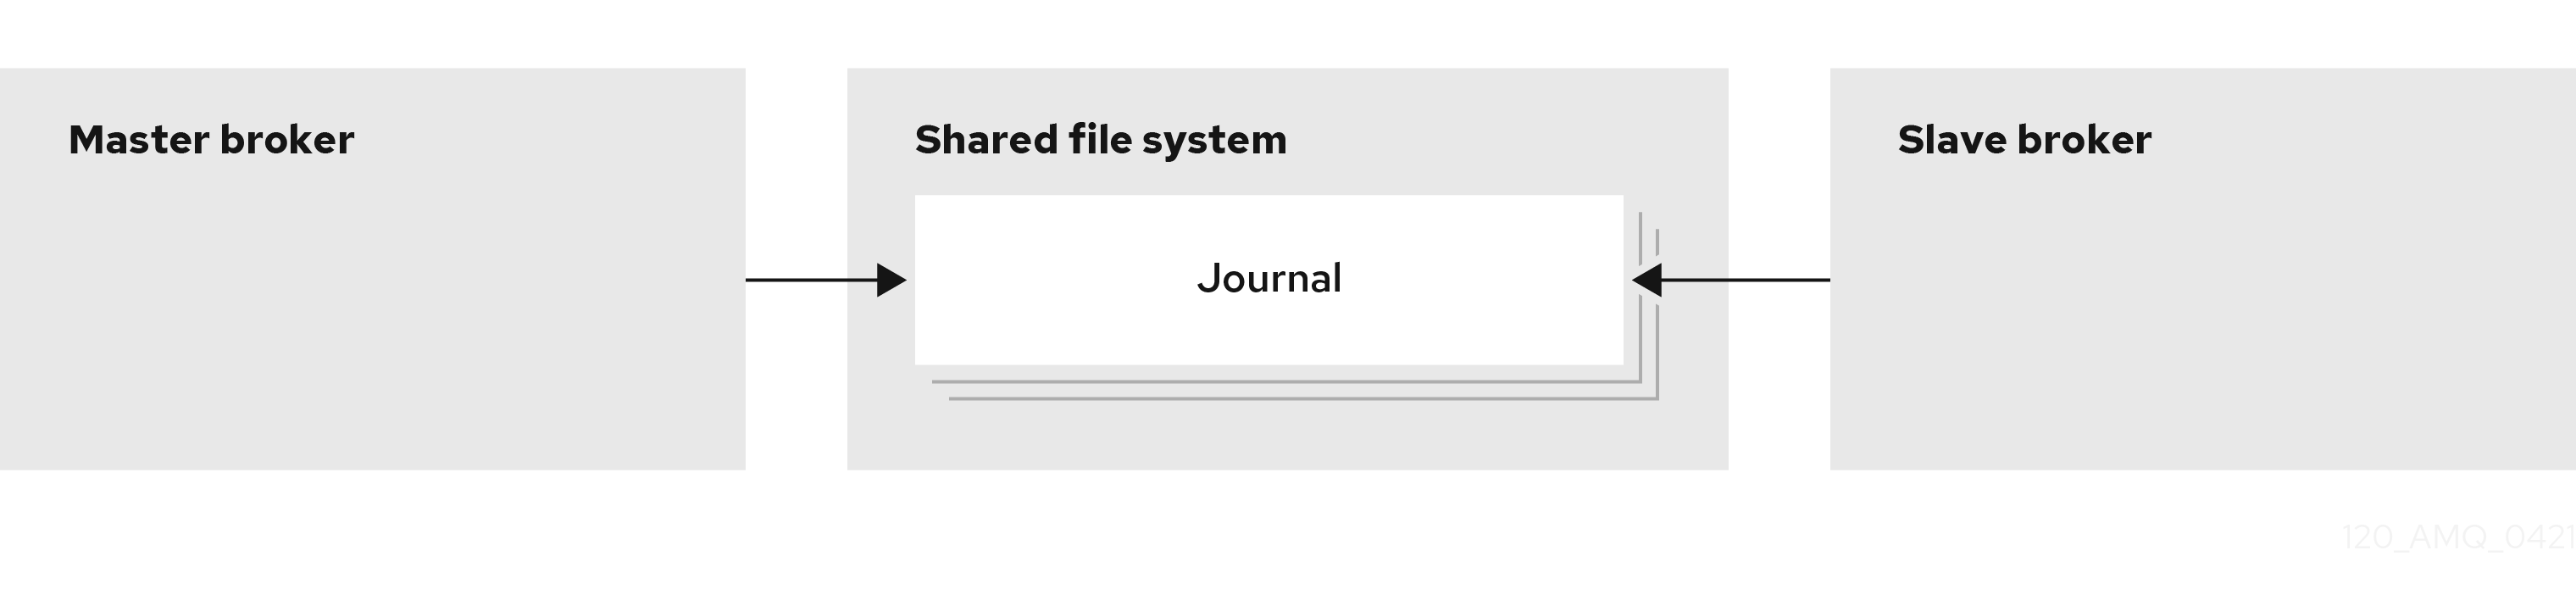 In the shared store HA policy the live and backup brokers both access the journal from a shared location.